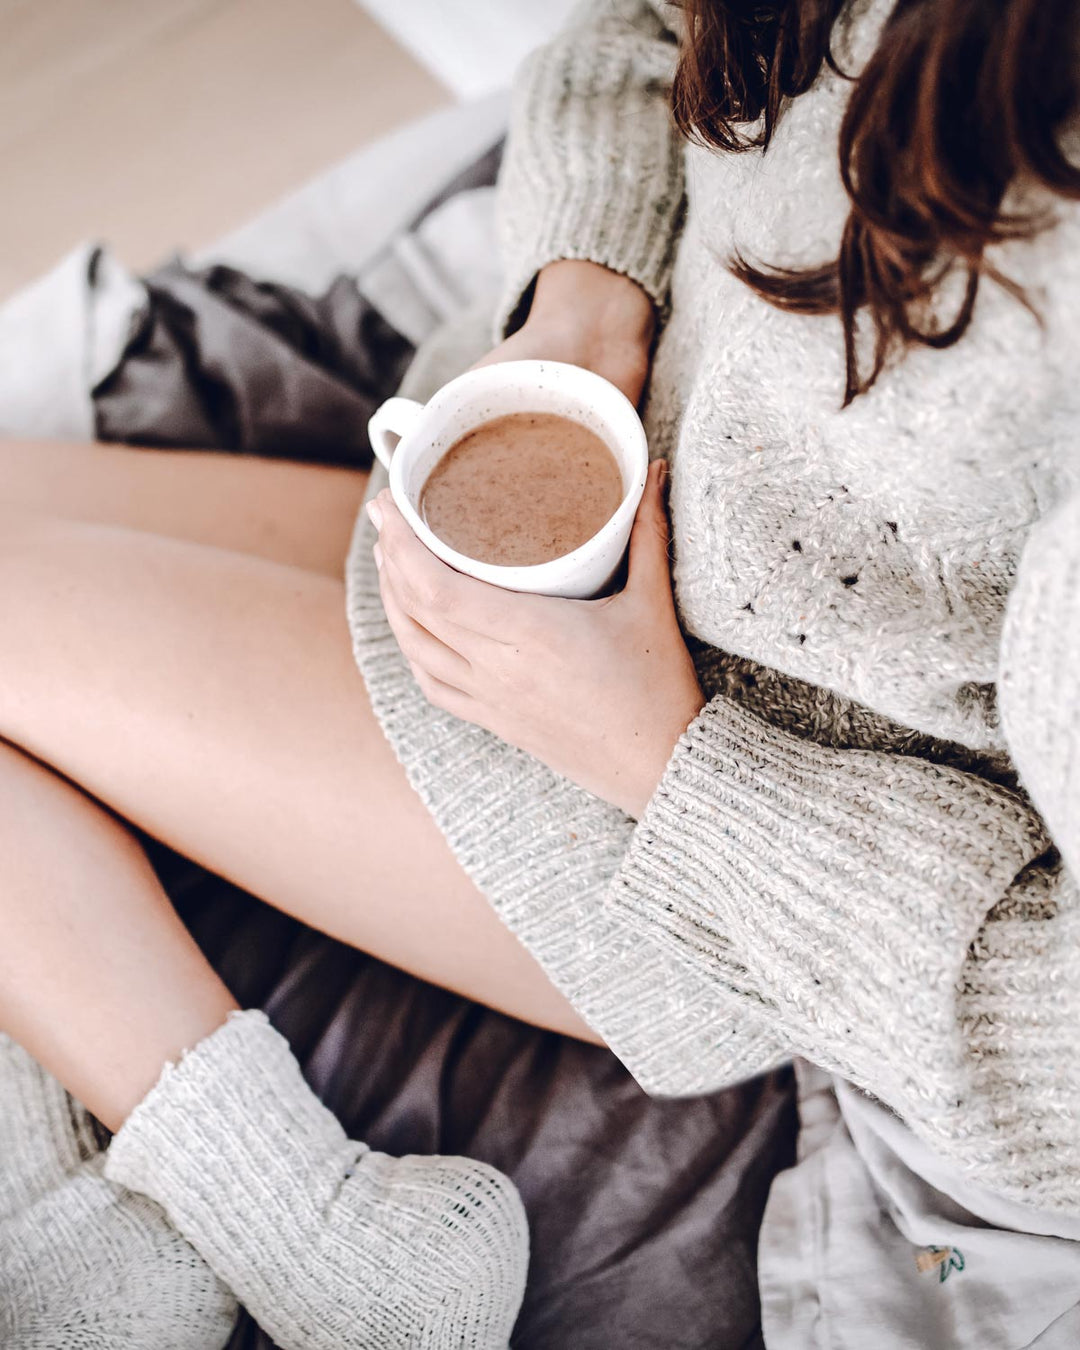 Hot cup of hot chocolate on a cozy couch surrounded by knits, jumpers and socks